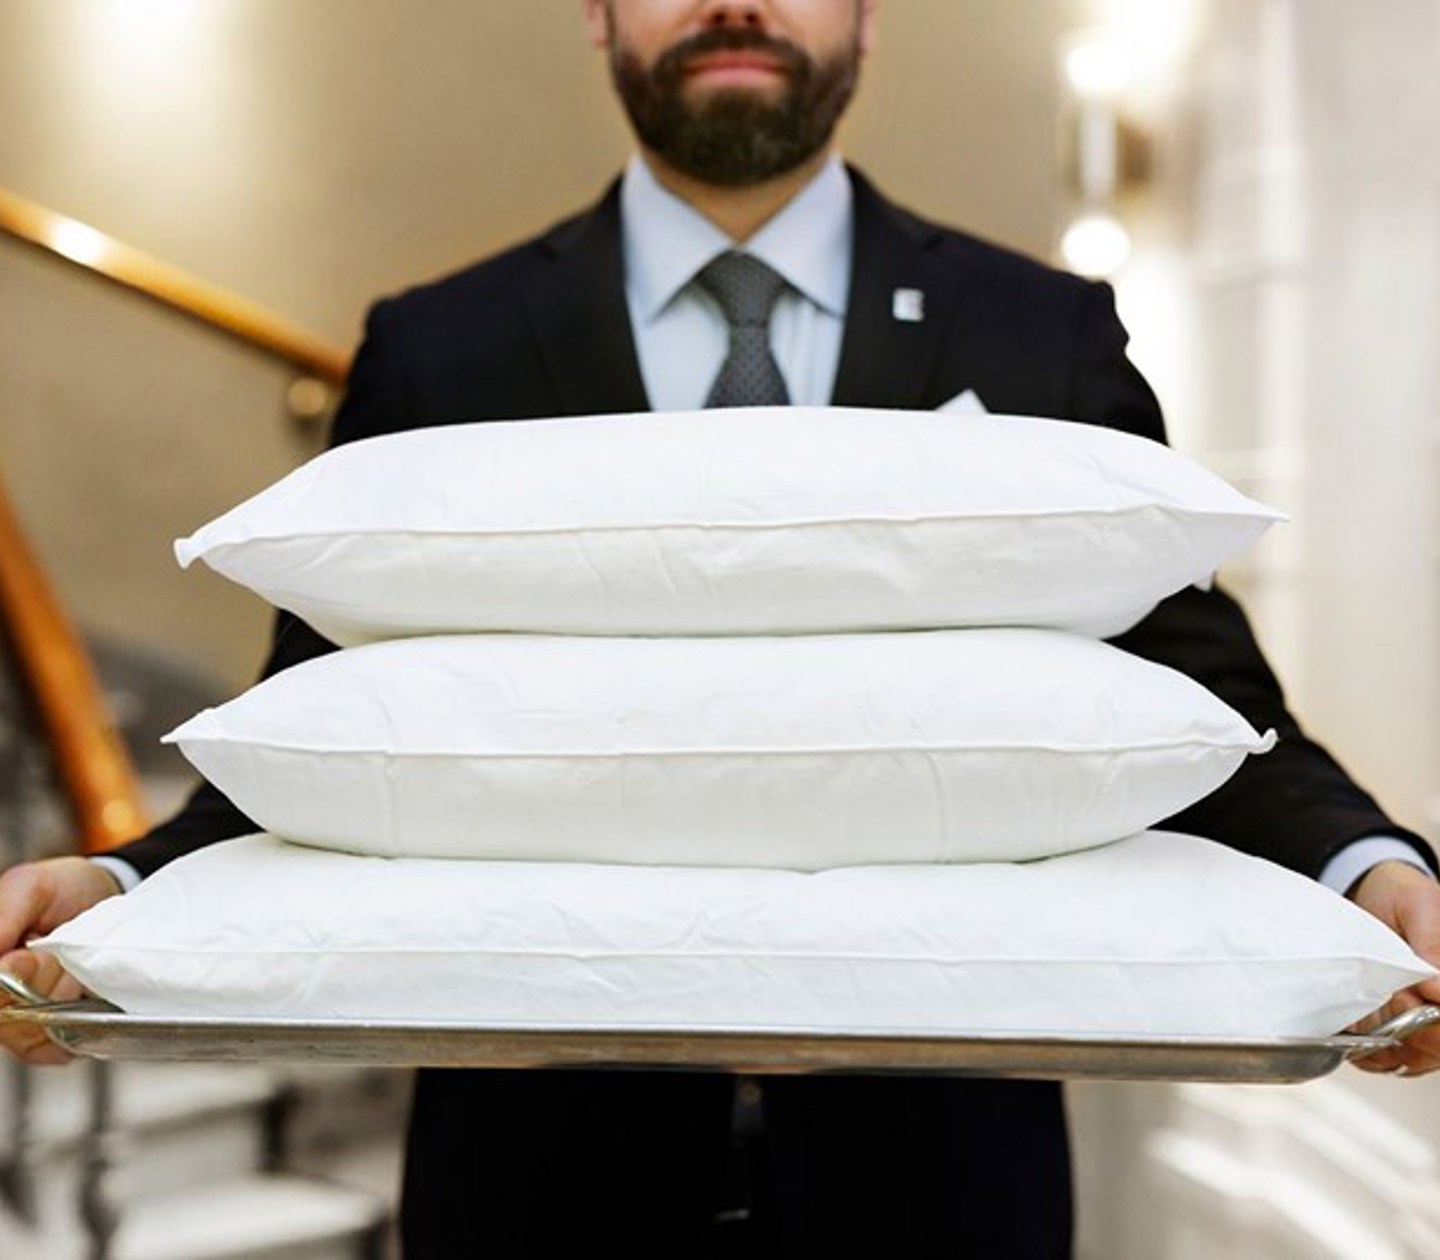 Pillows on a tray